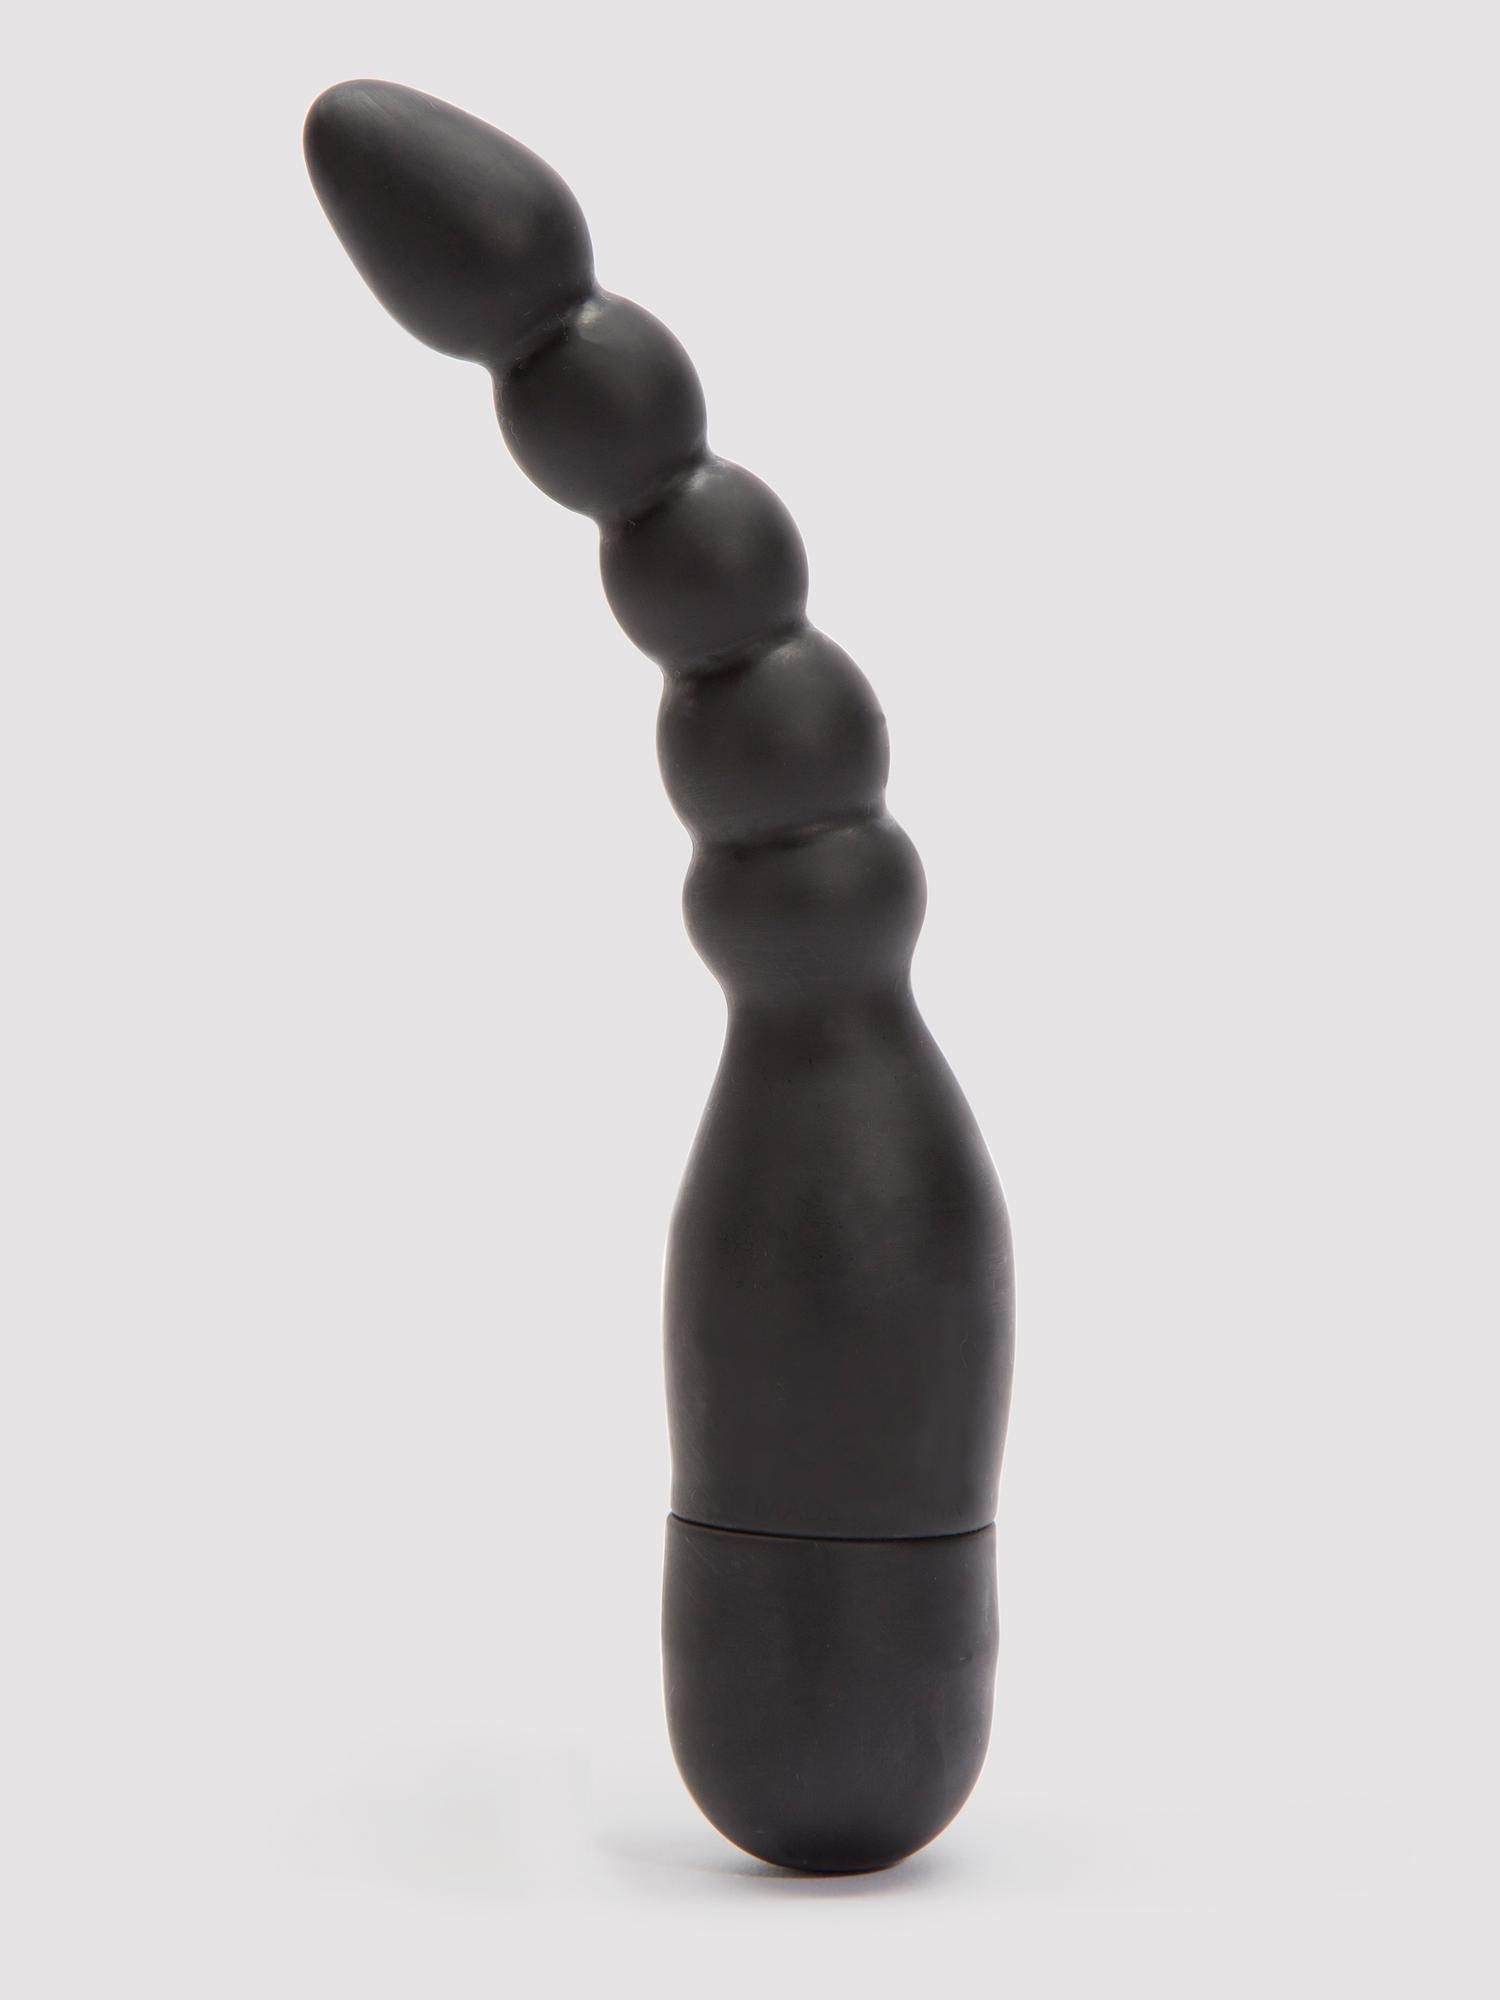 This is the most wonderful anal dildo I used in my life